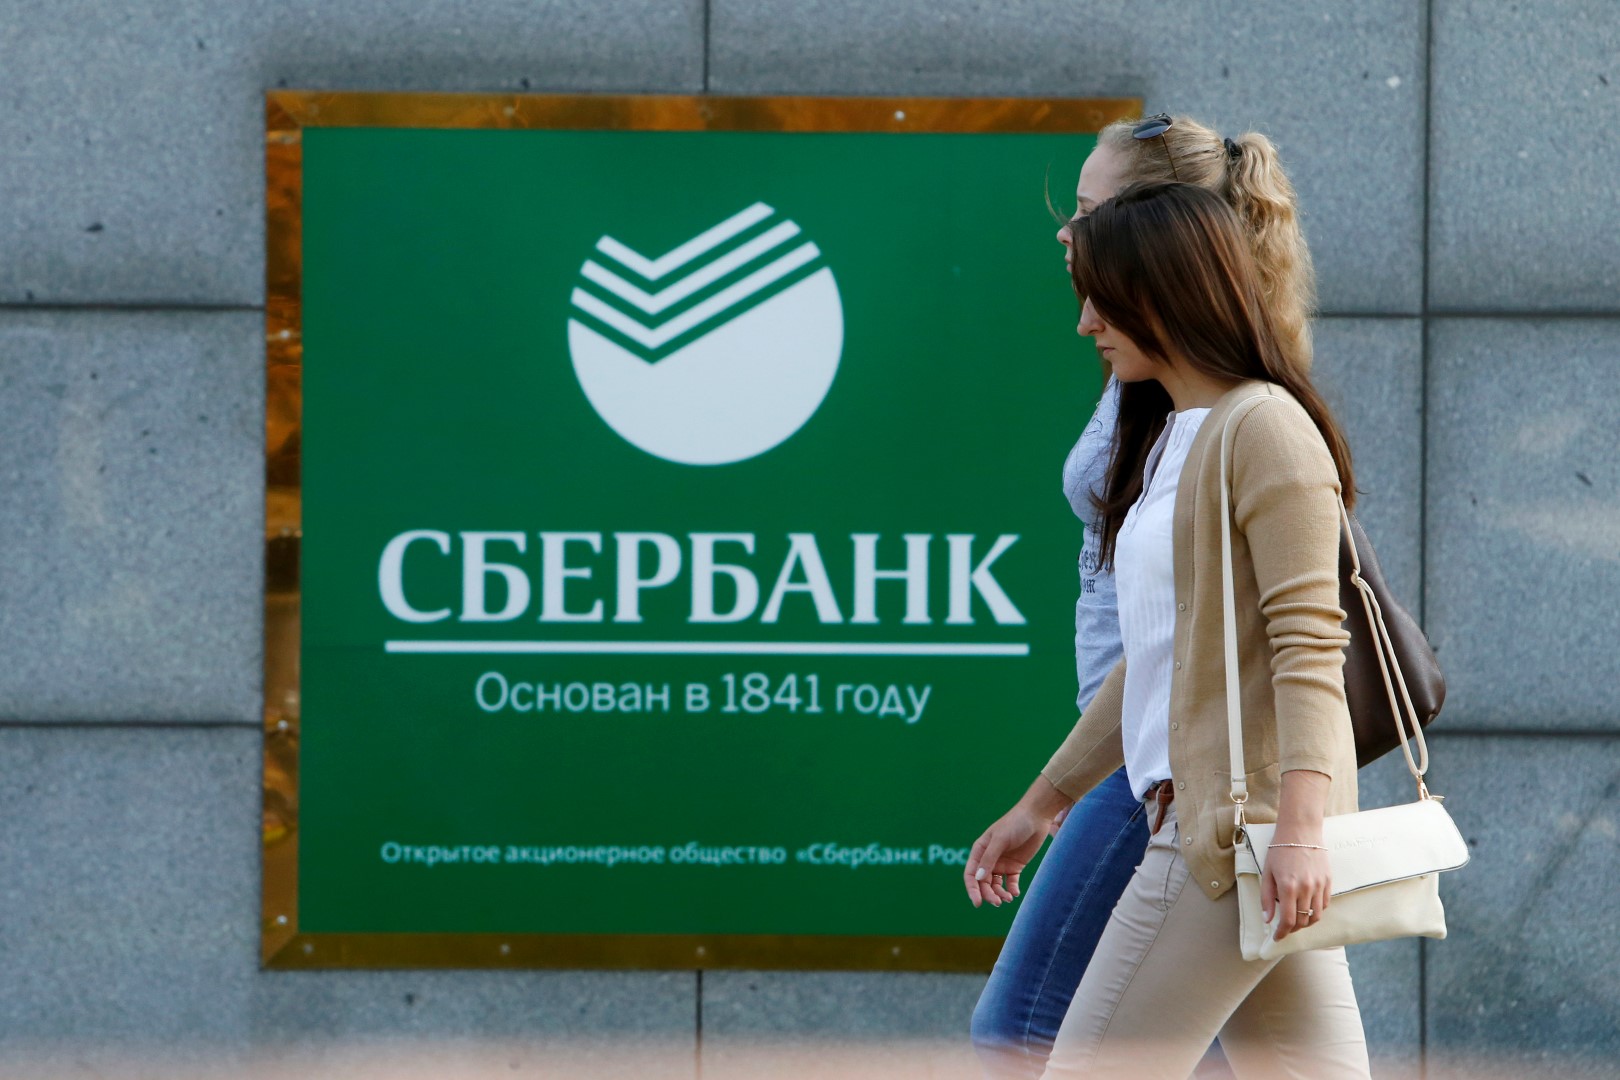 Women walk past an office of Sberbank in Moscow September 12, 2014. The United States will take new steps to limit access of major Russian banks, including Sberbank, to U.S. debt and equity markets to punish Russia for its intervention in Ukraine, sources familiar with matter said. REUTERS/Sergei Karpukhin (RUSSIA  - Tags: BUSINESS POLITICS CIVIL UNREST CONFLICT) - GM1EA9C1CTZ01